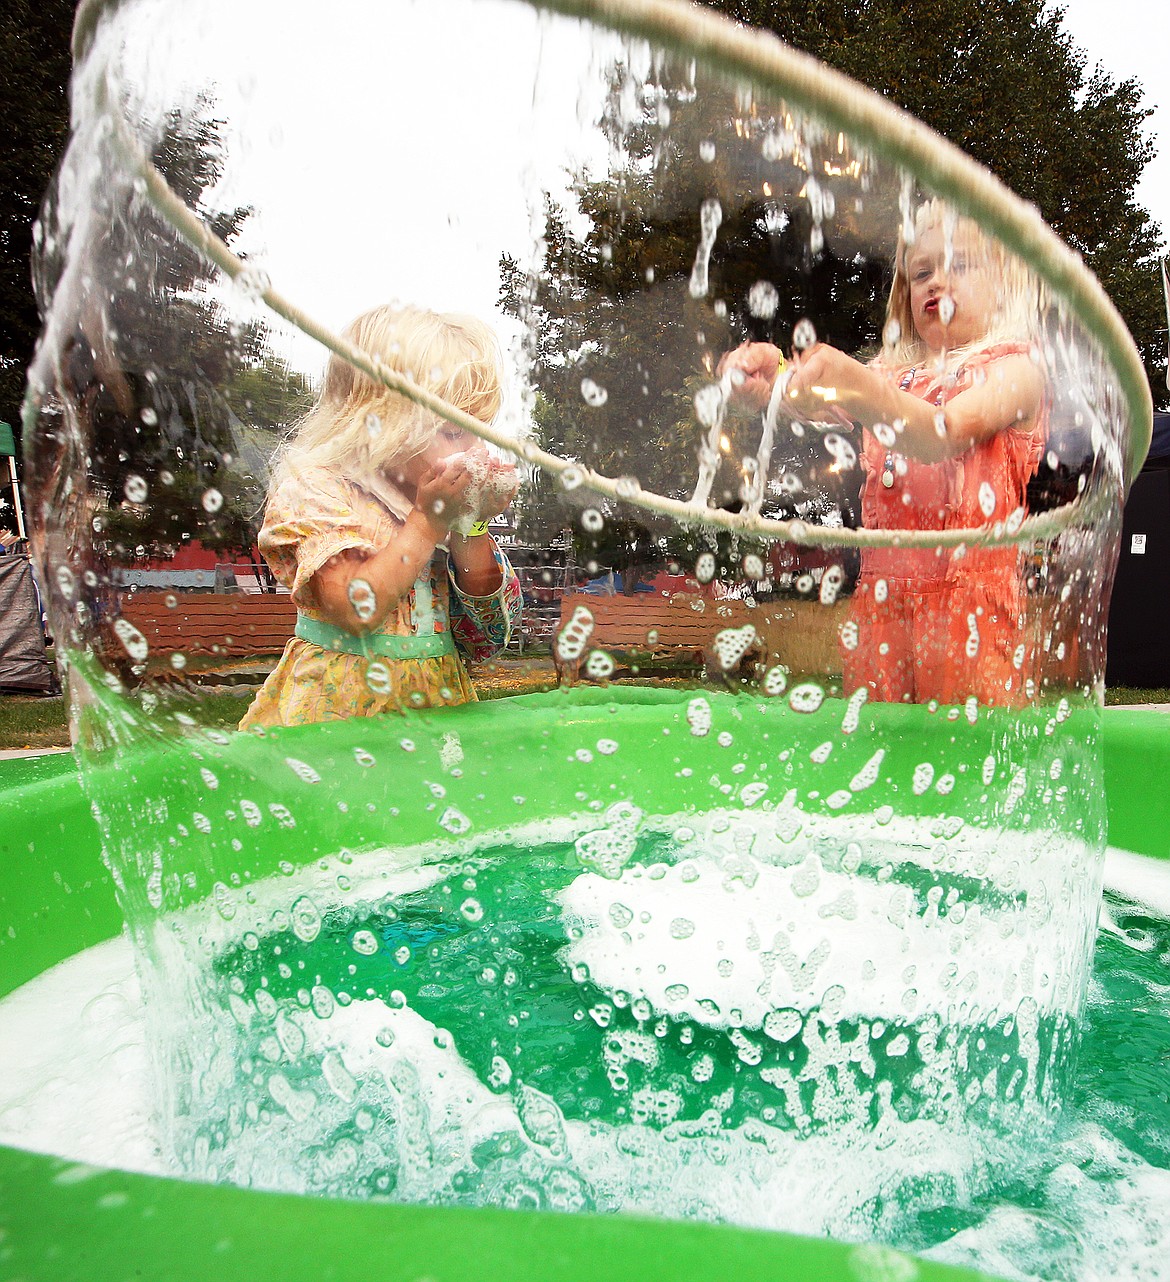 Desi and Charlotte Wagner have fun making giant bubbles at the Wild Science program at the North Idaho State Fair on Friday.